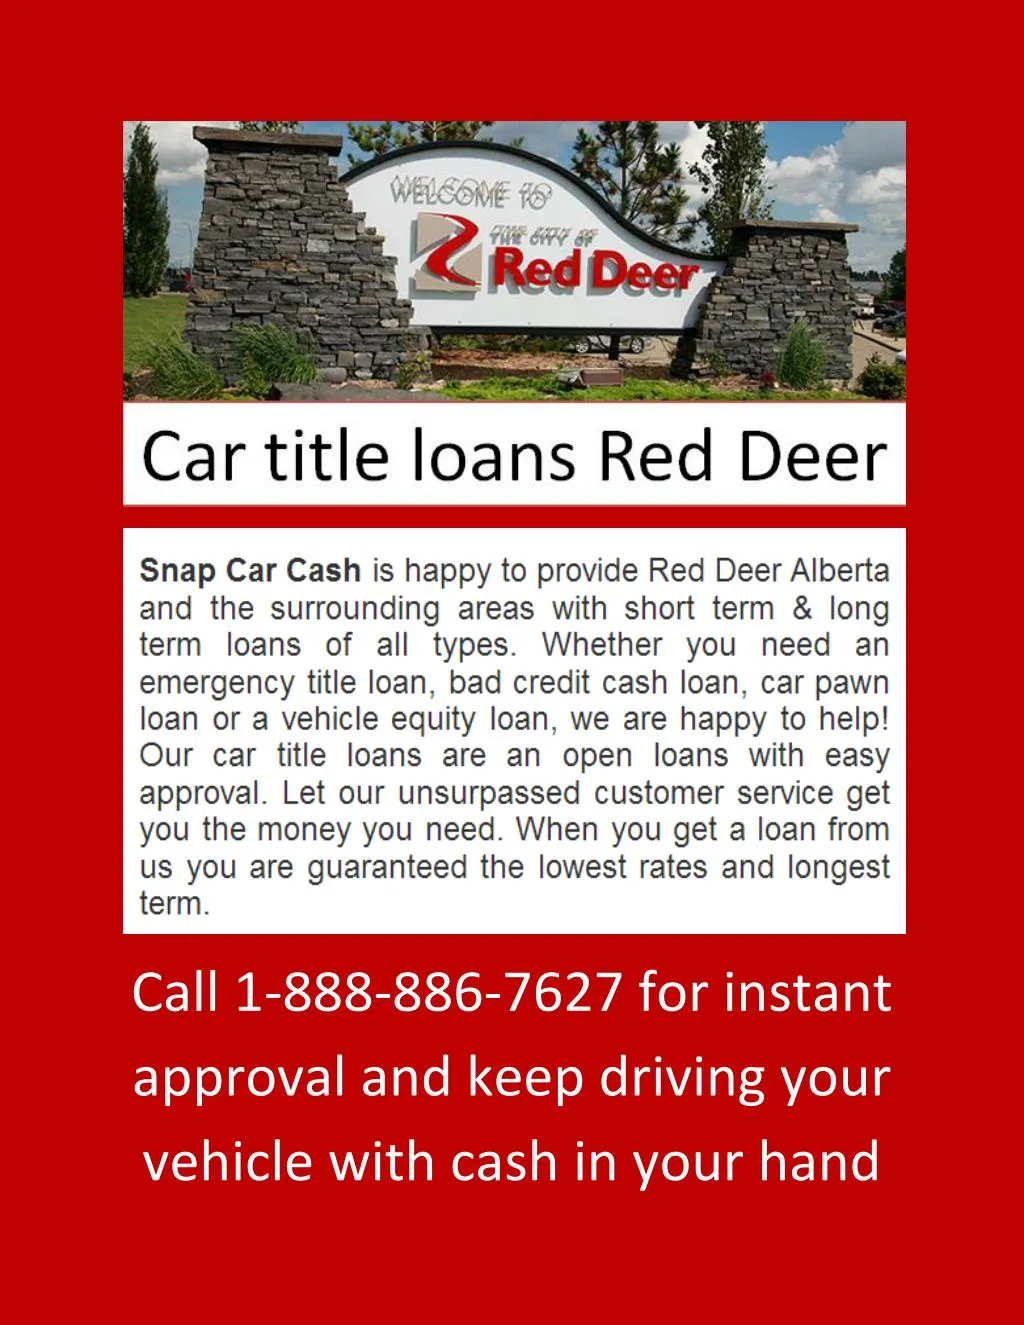 call 1 888 886 7627 for instant approval and keep